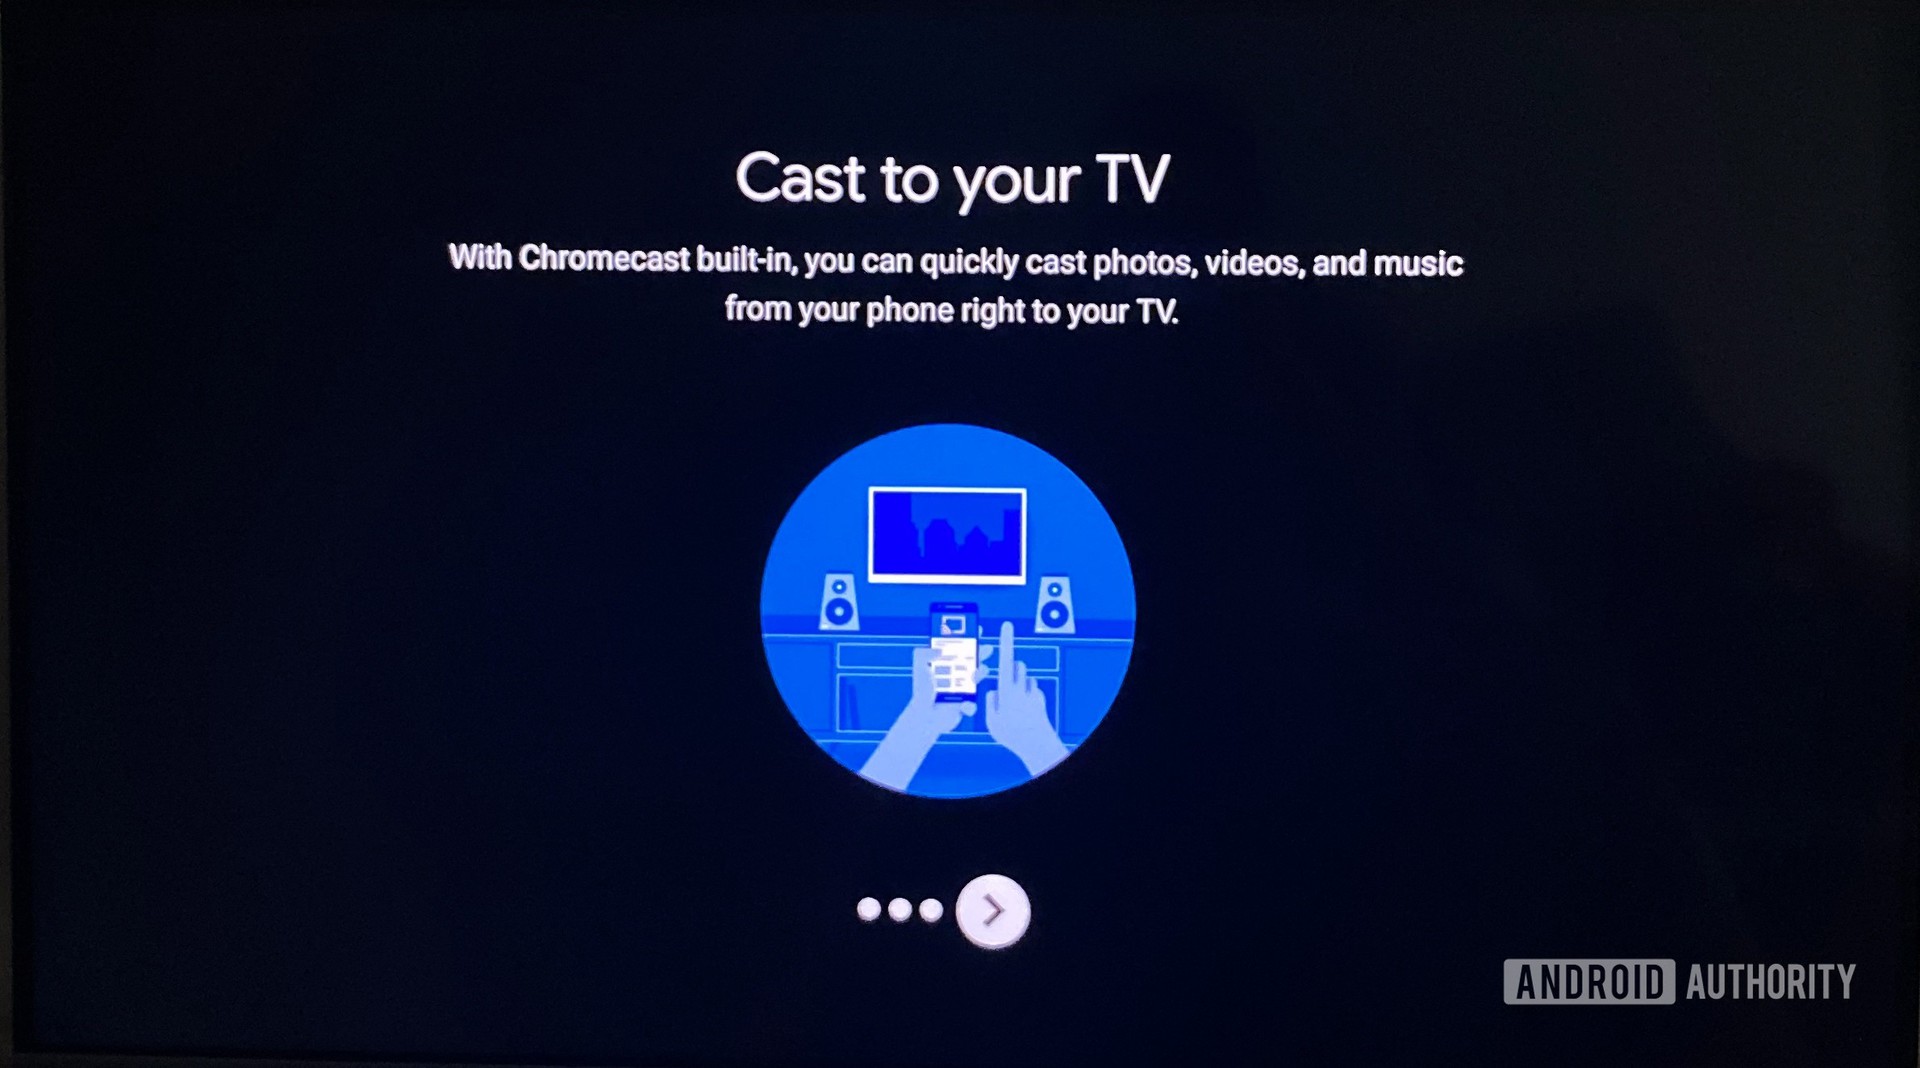 We asked, you told us: Many of you own an Android TV set or box